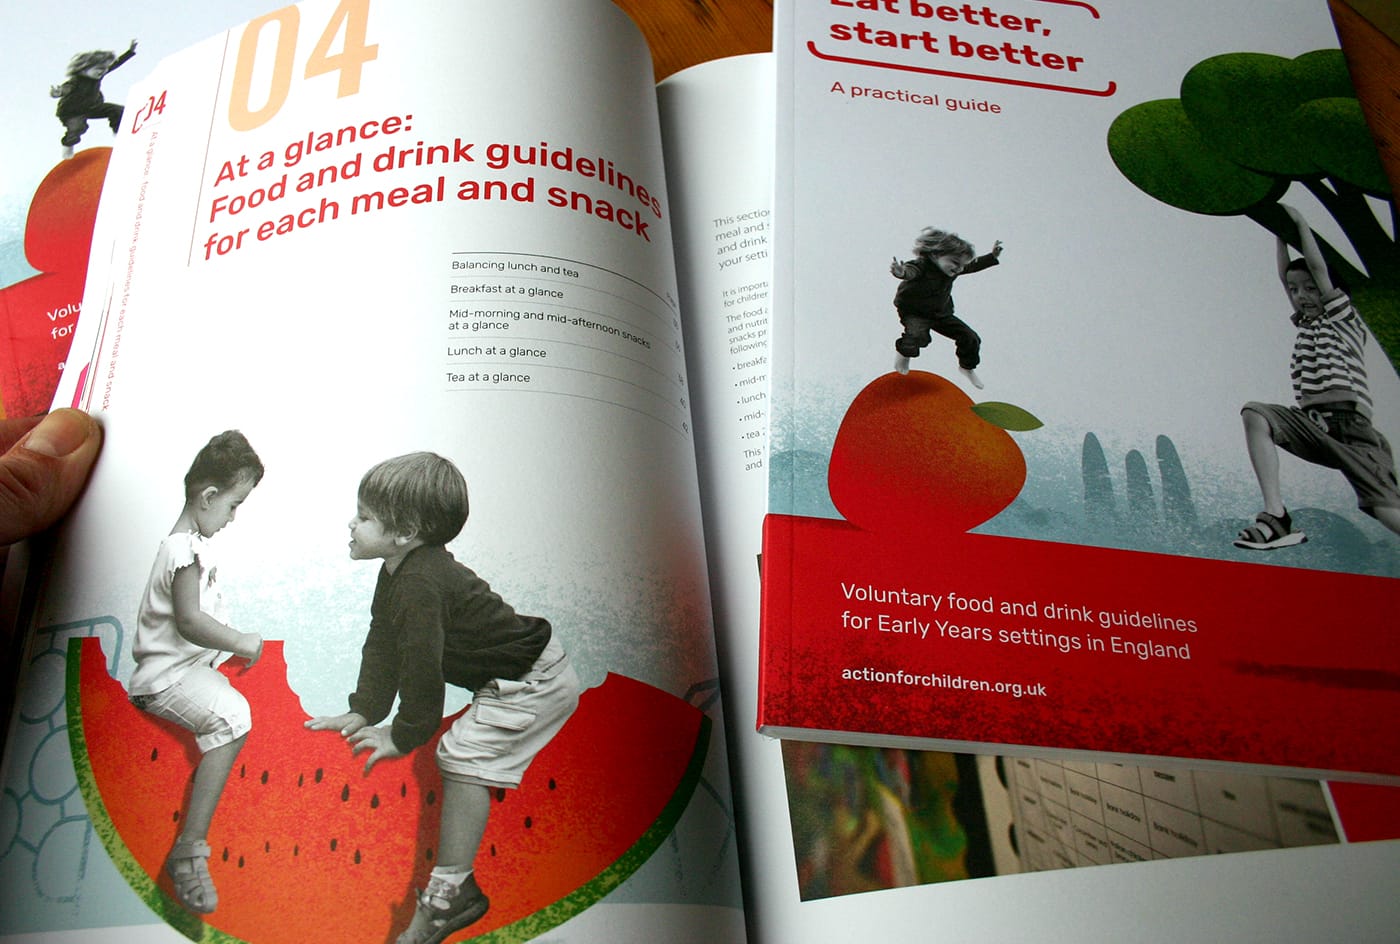 Creation of playful imagery & infographics on behalf of a national children's charity.